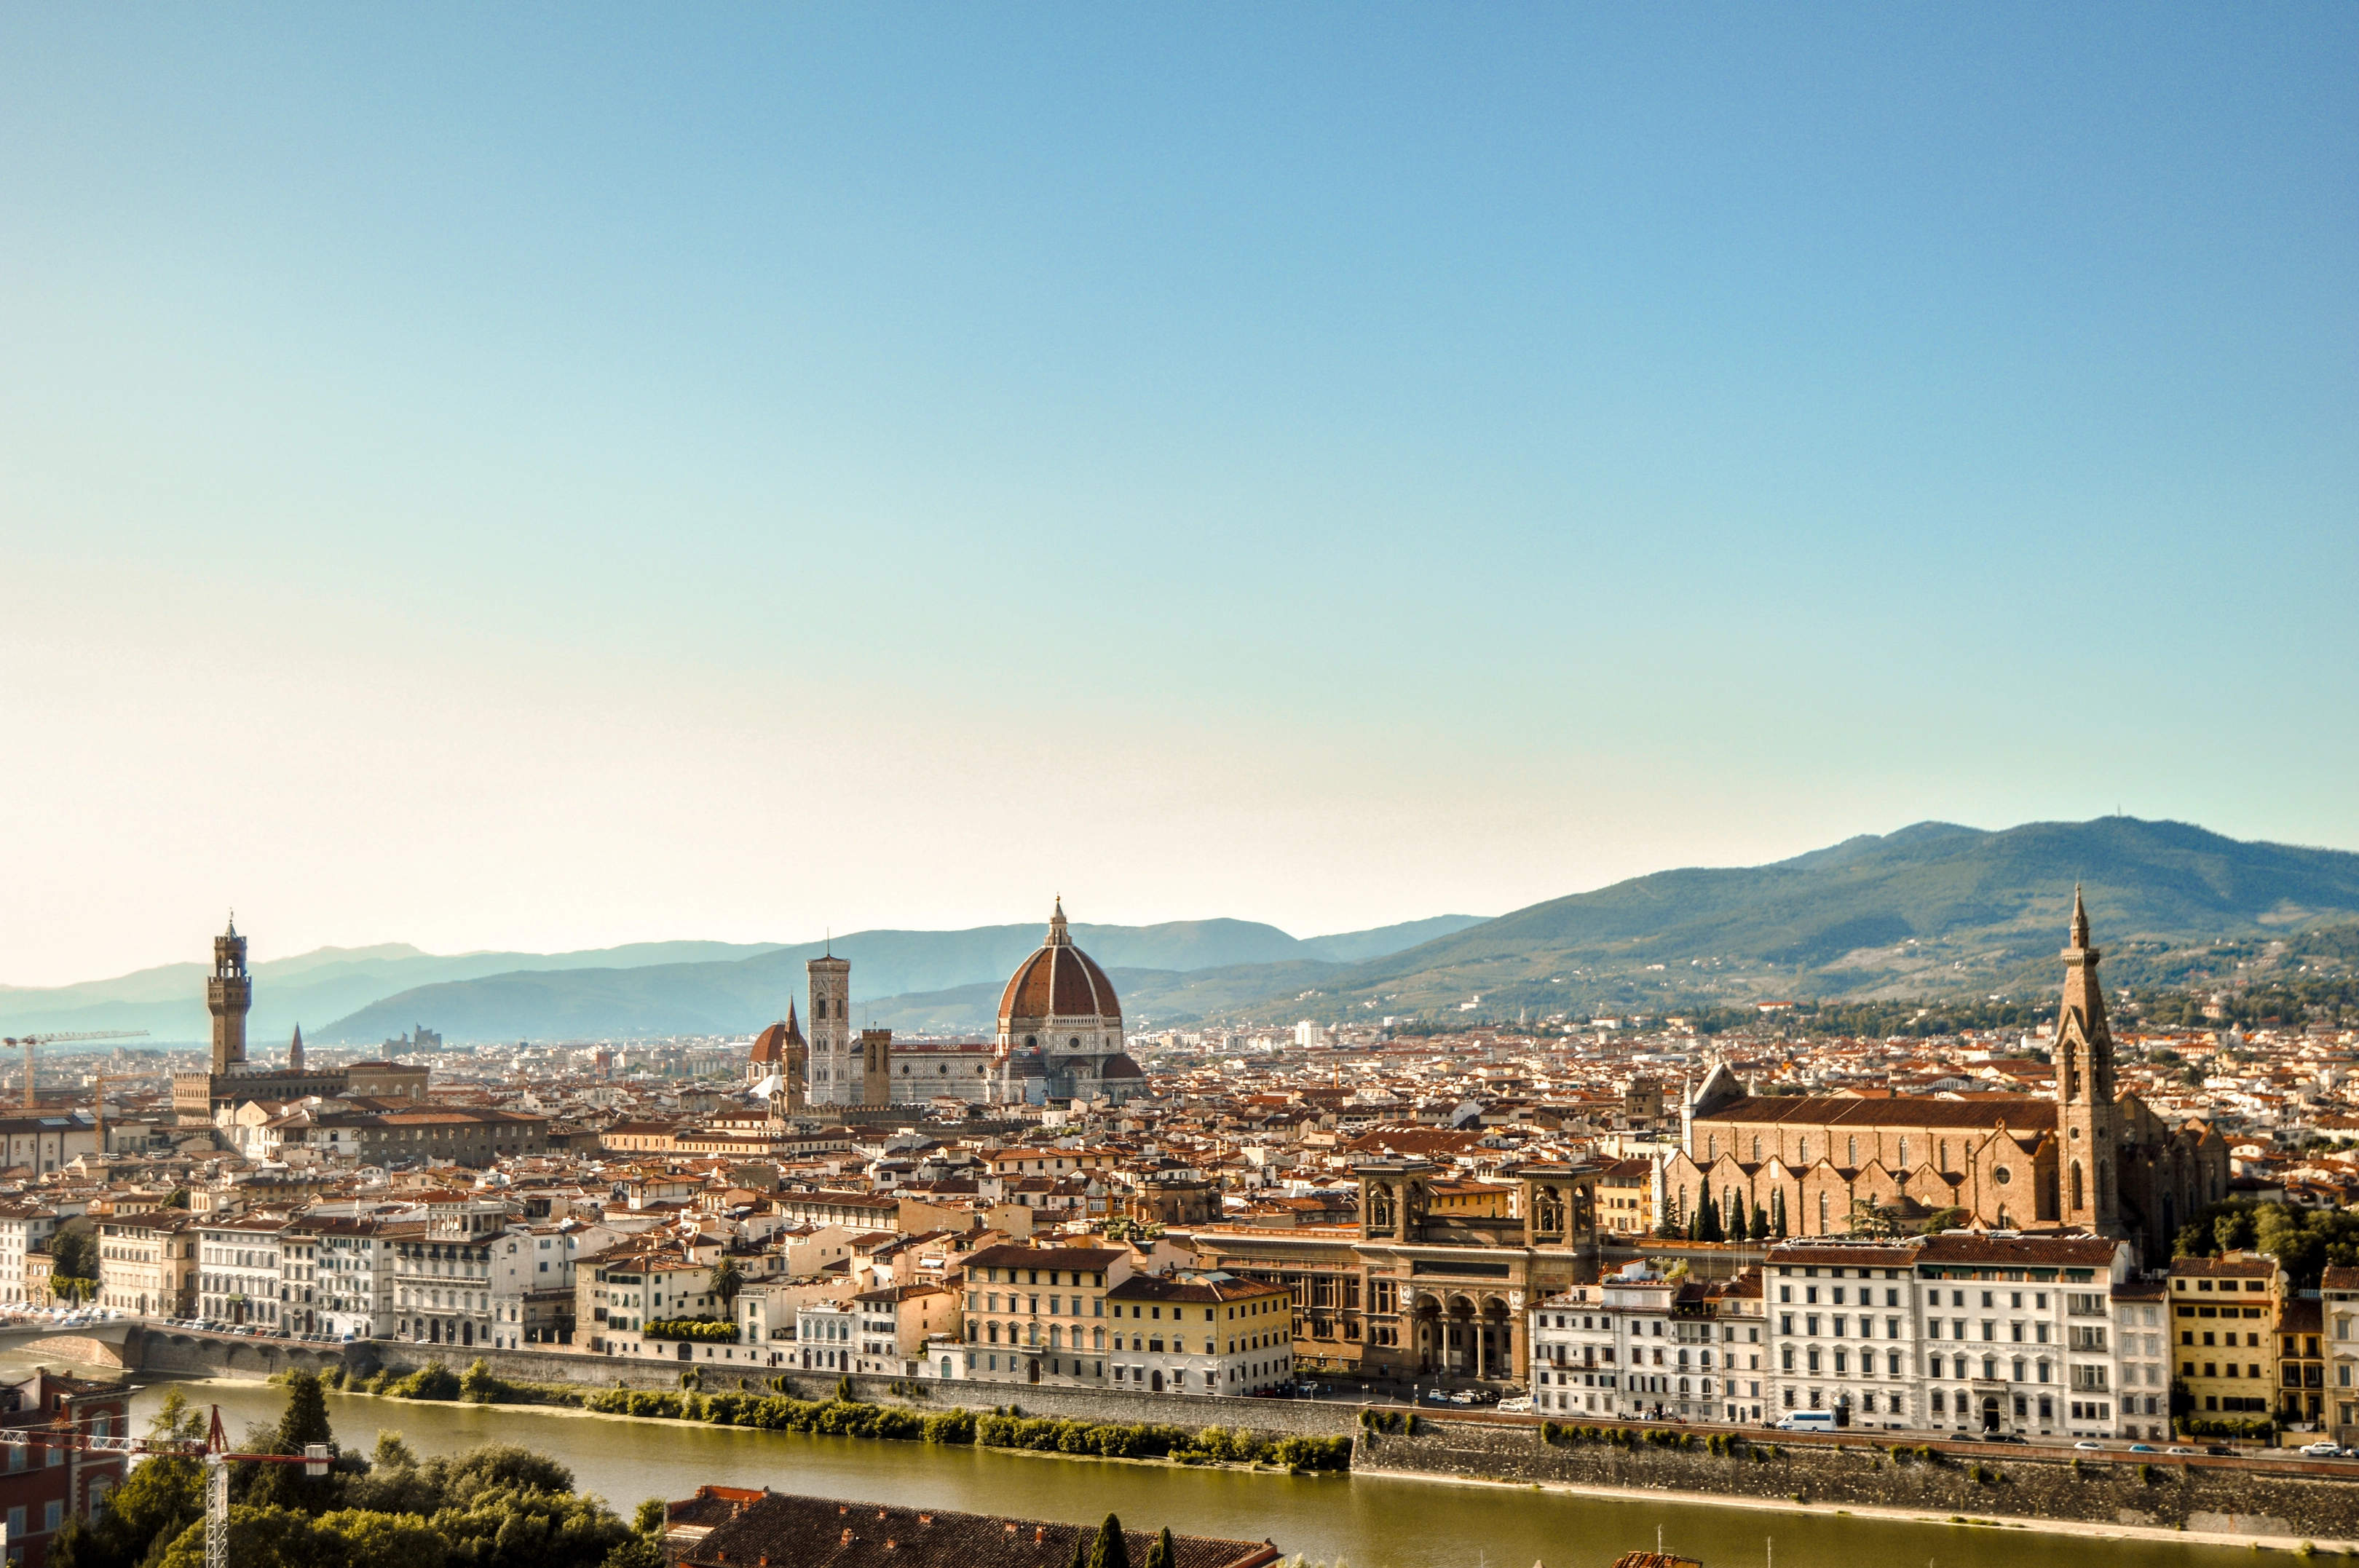 Capture your memories with a photoshoot in Florence